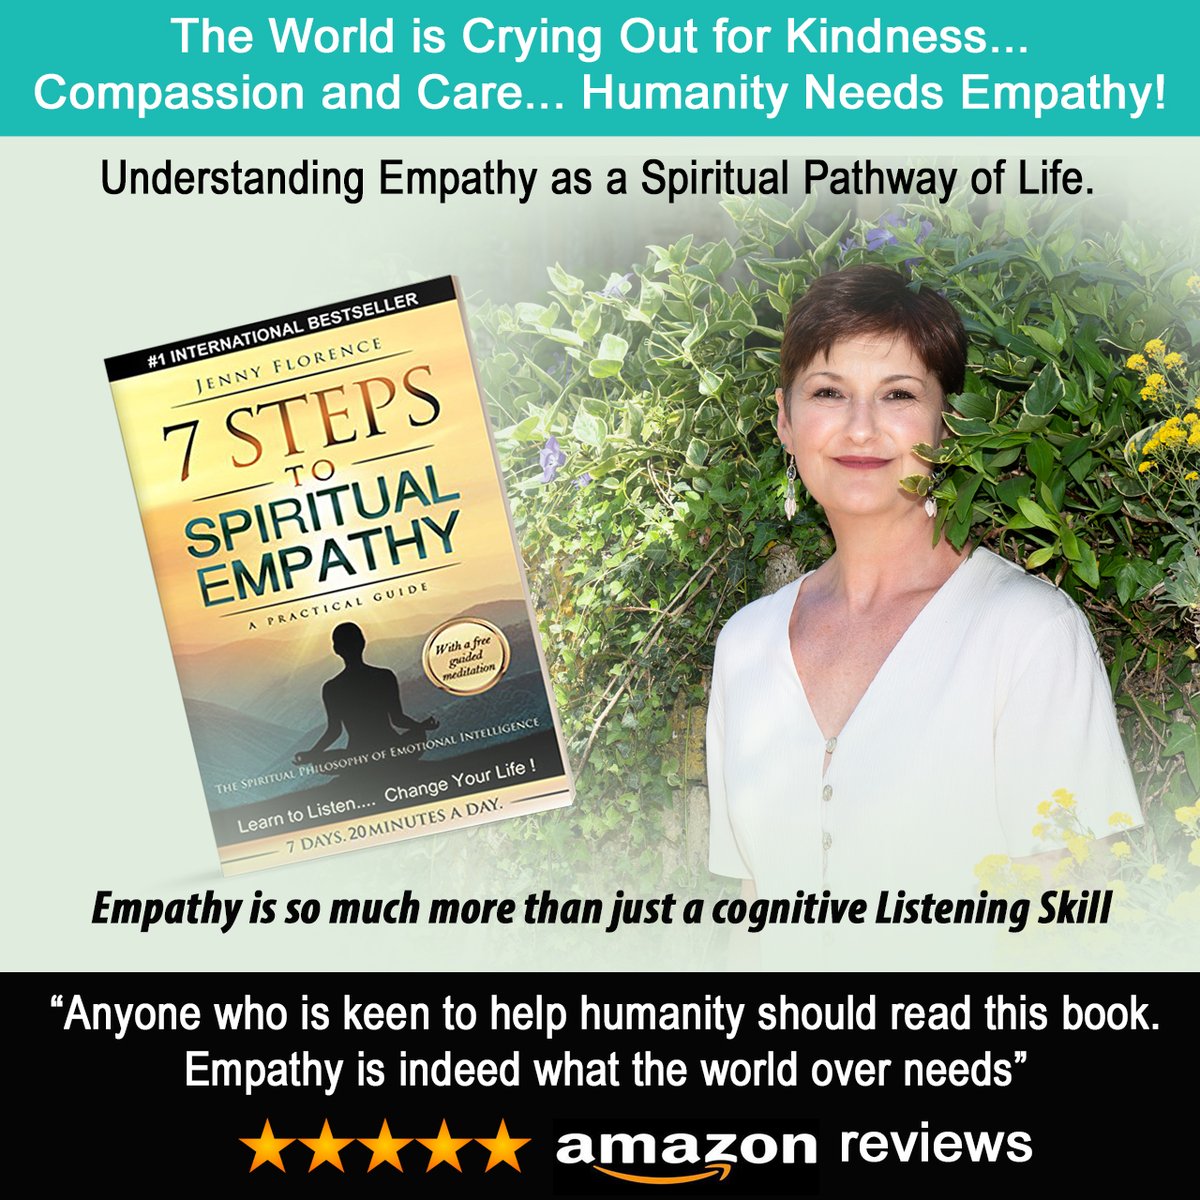 I wrote this book in Meditation
https://t.co/Z3CtM7lF4b

A 7 day series of Empathy Meditations is available Free of Charge in the https://t.co/8pEpyhi8xM Library

They are part of my personal contribution to bring positive change into the world through the development of Empathy https://t.co/QFCHMzdhJq